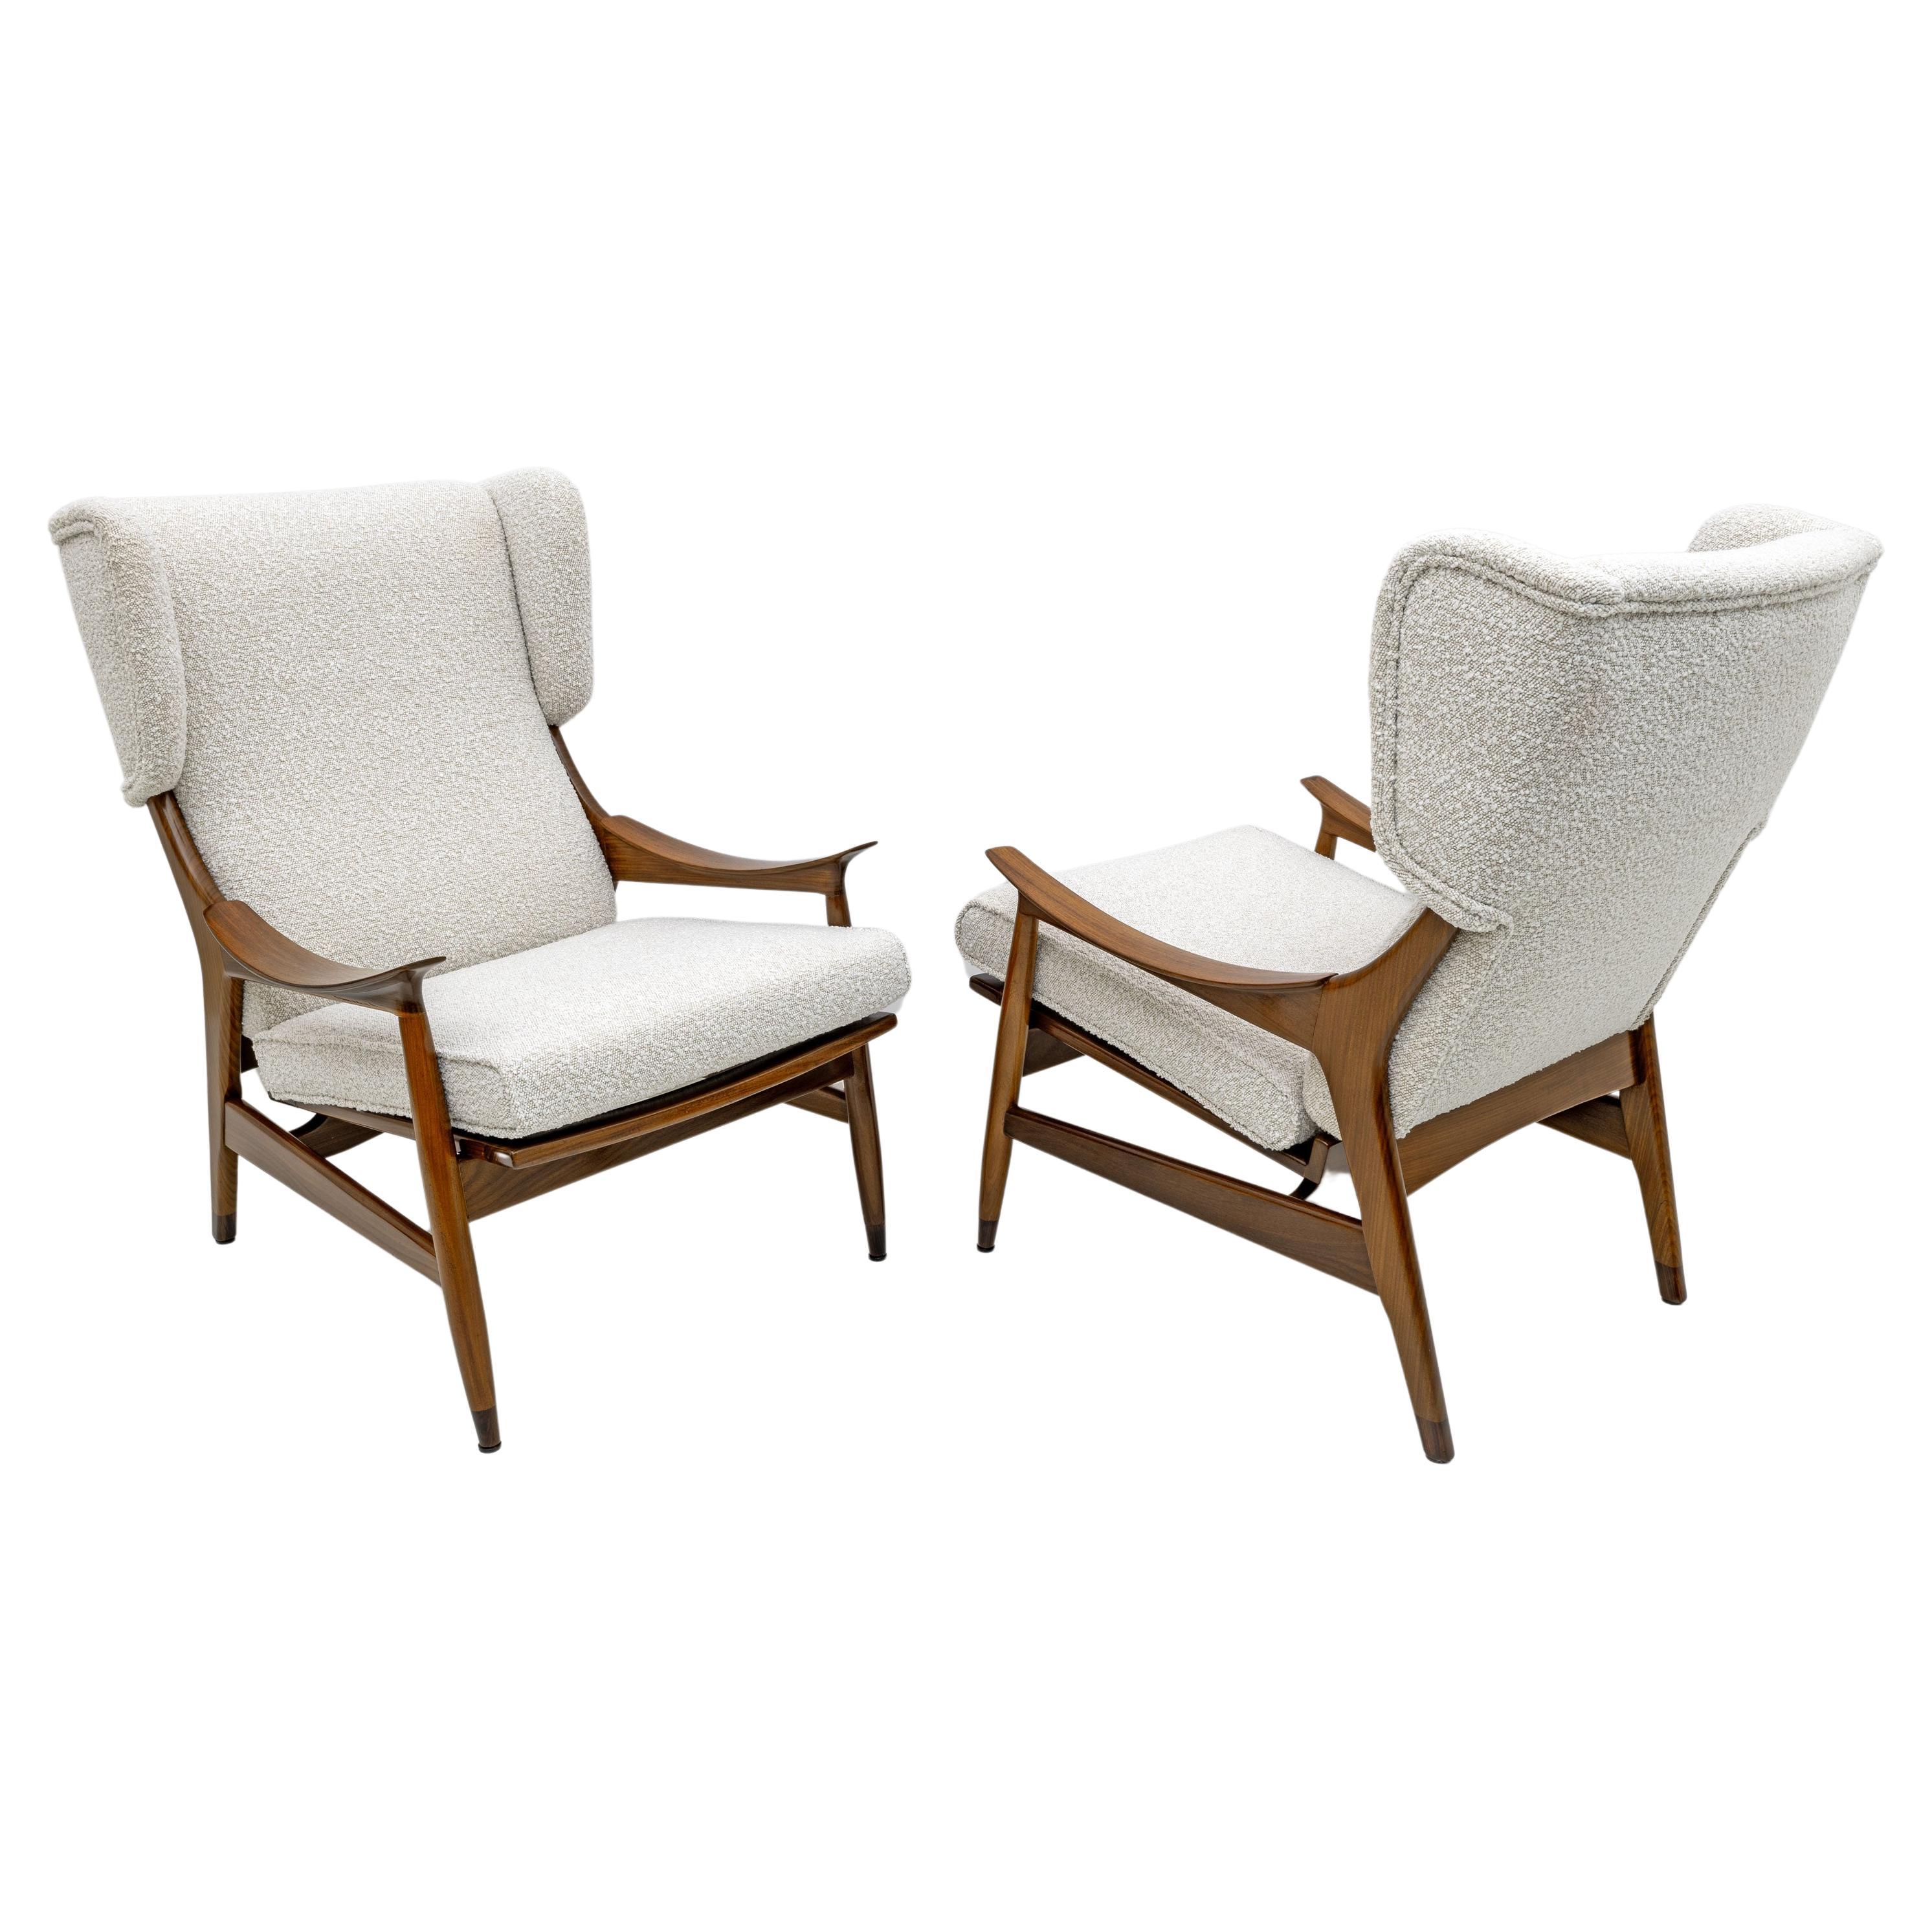 Pair of Mid-Century Modern Teak and Bouclè Armchairs Model FM 106 by Framar, 50s For Sale